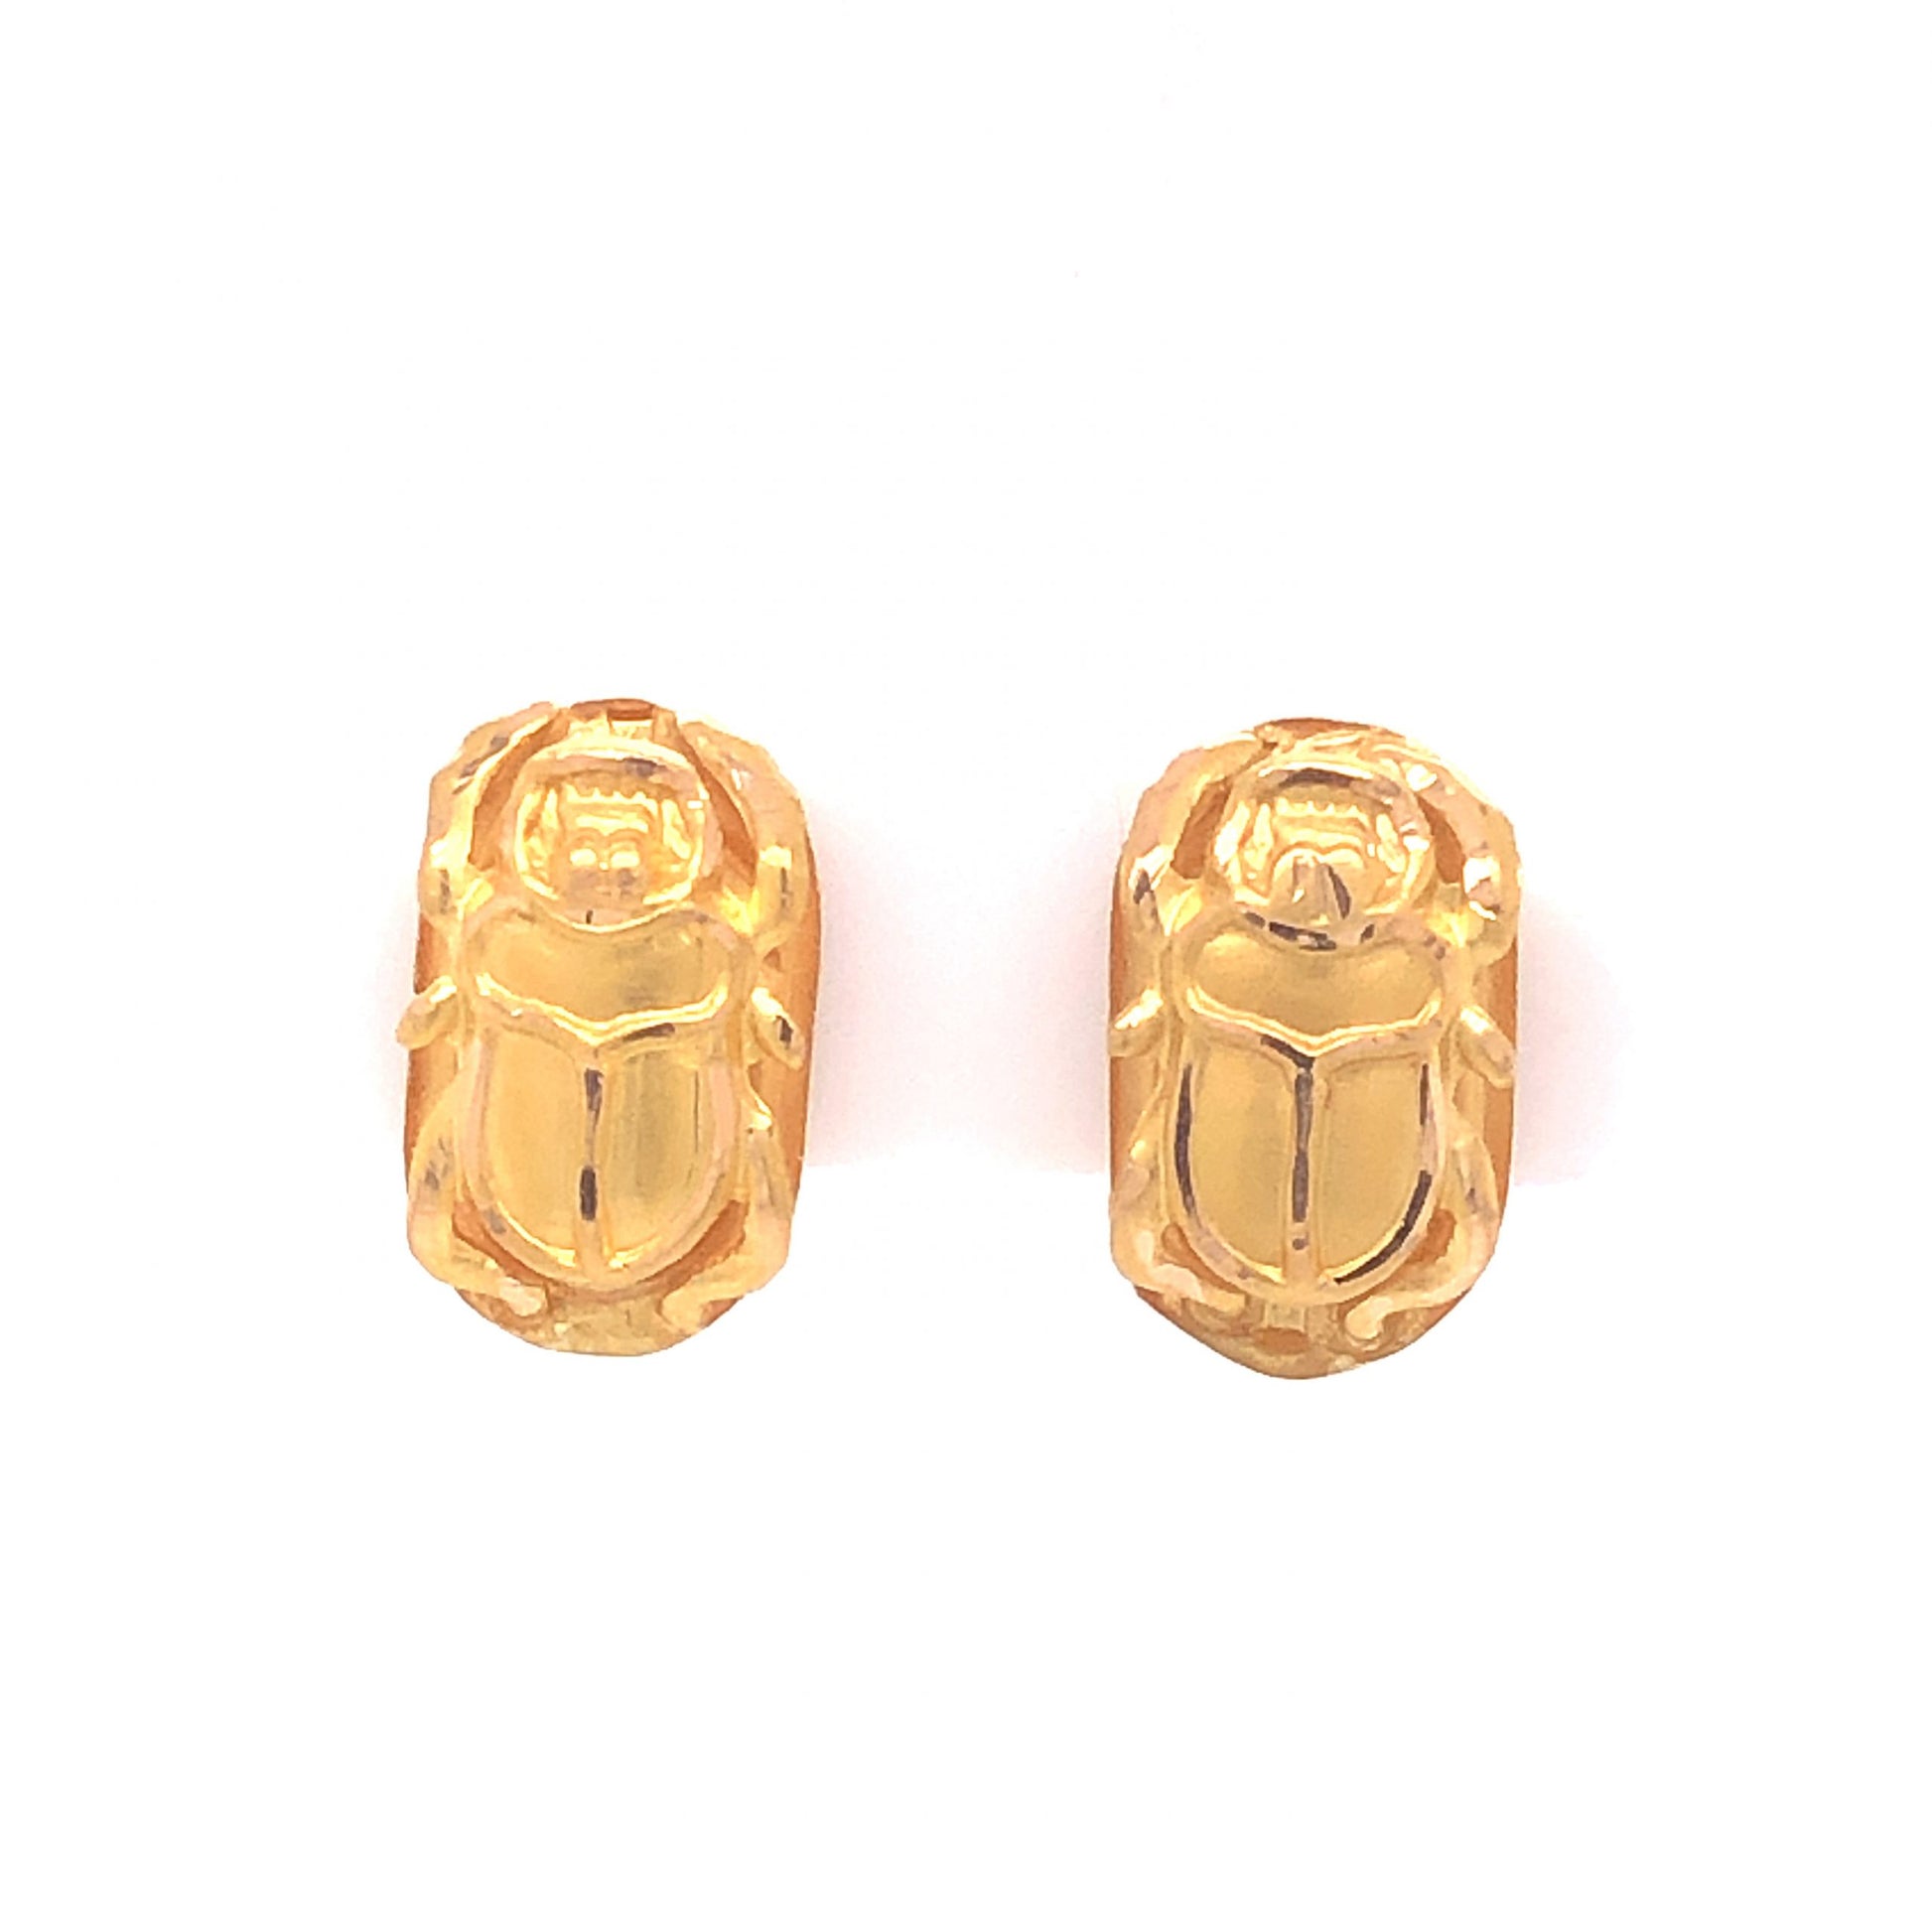 Scarab Gold Beetle Earrings Insect Studs Solid Brass Gold 